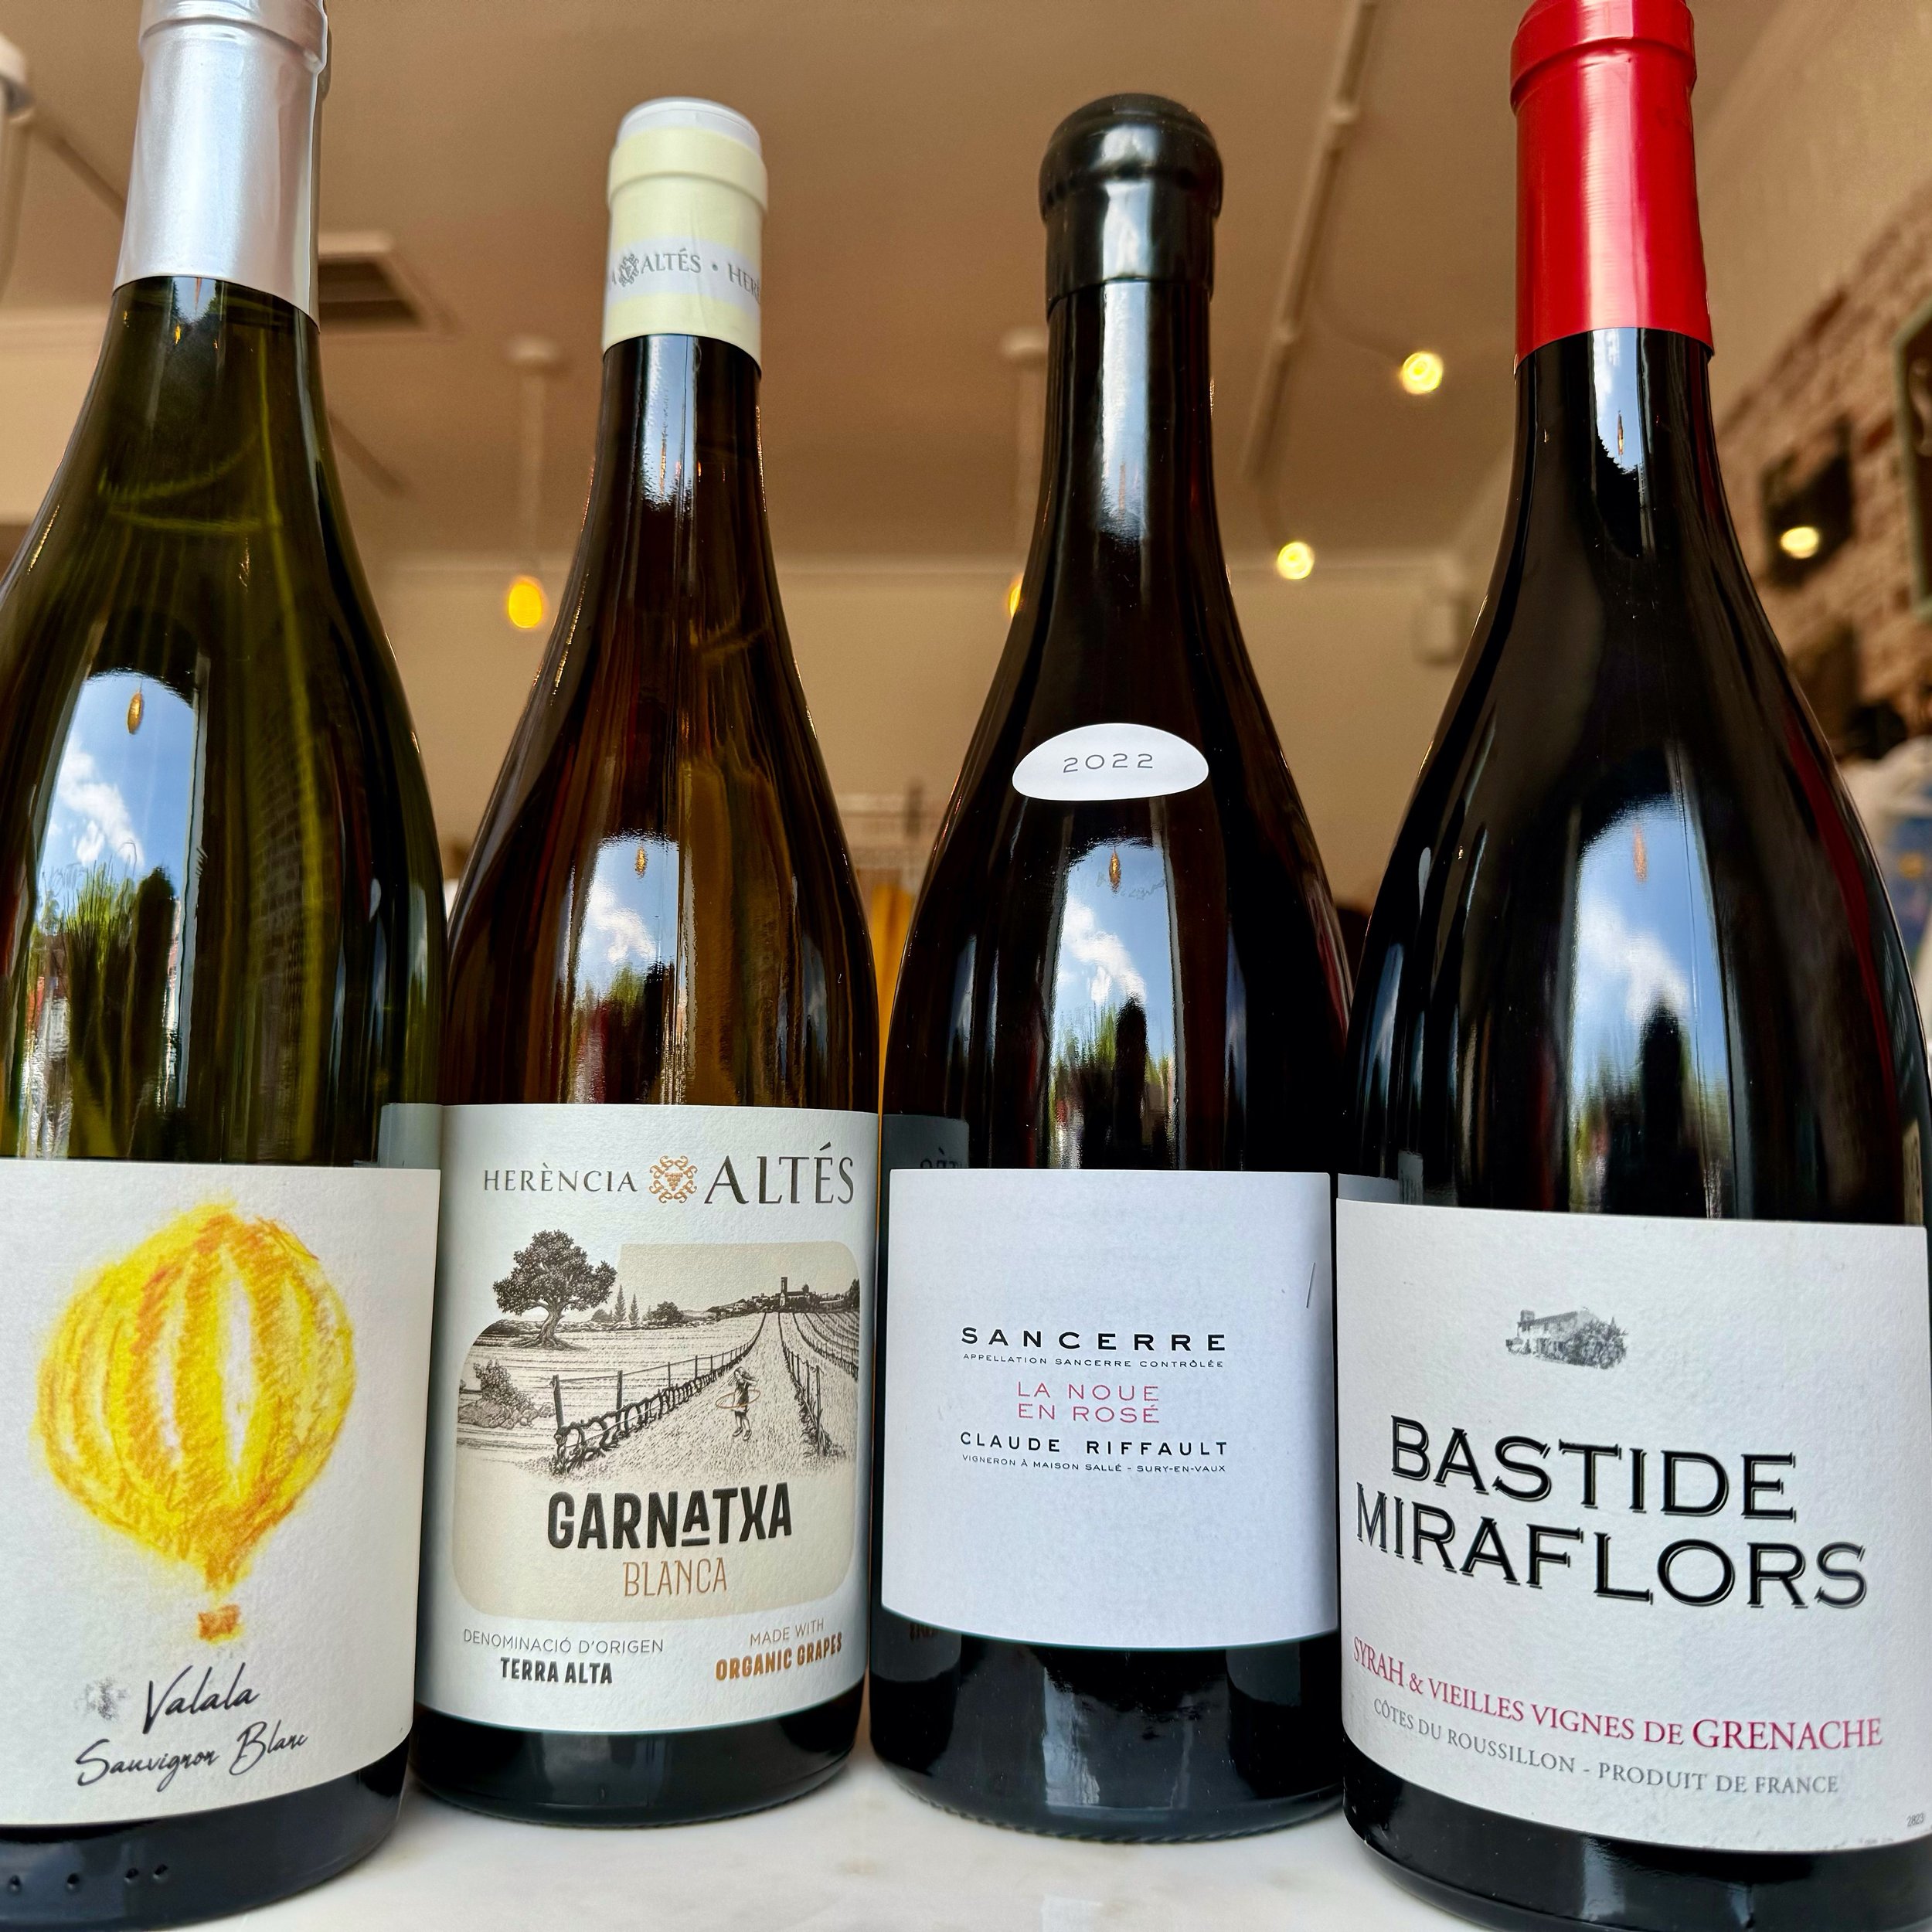 We&rsquo;re delighted to pair Saturday&rsquo;s Simply Audrey&rsquo;s Sidewalk Sale with a visit from Melinda Kate Calloway. She&rsquo;ll be pouring a fresh and bright Loire Valley Sauvignon Blanc from Jean Francois Merieau, a richer, southern Rh&ocir